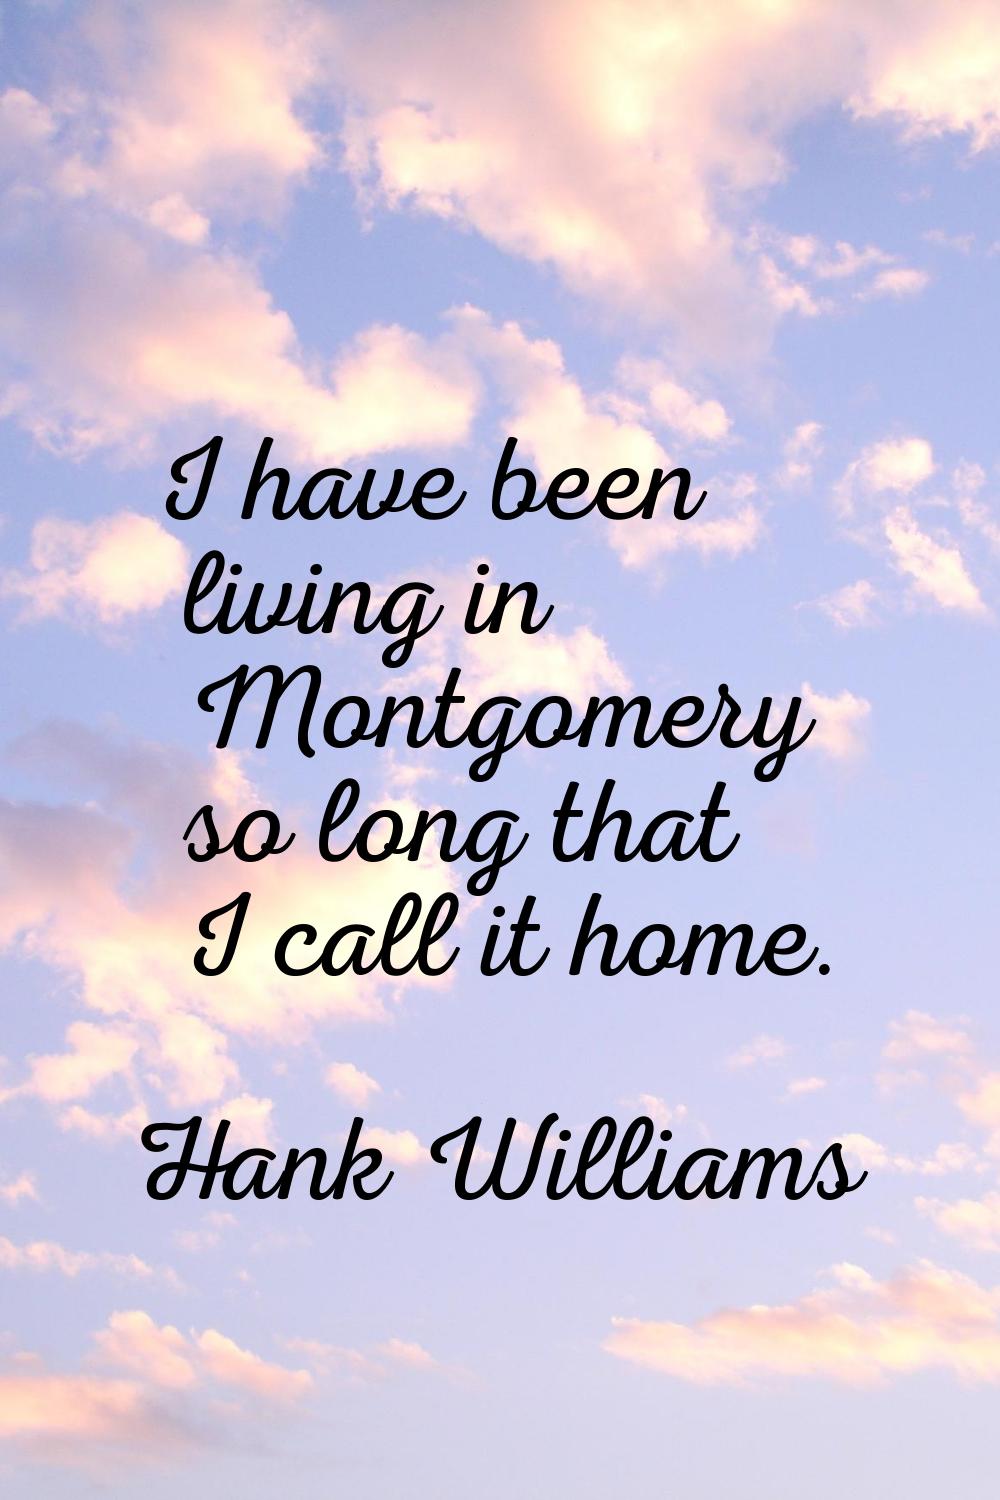 I have been living in Montgomery so long that I call it home.